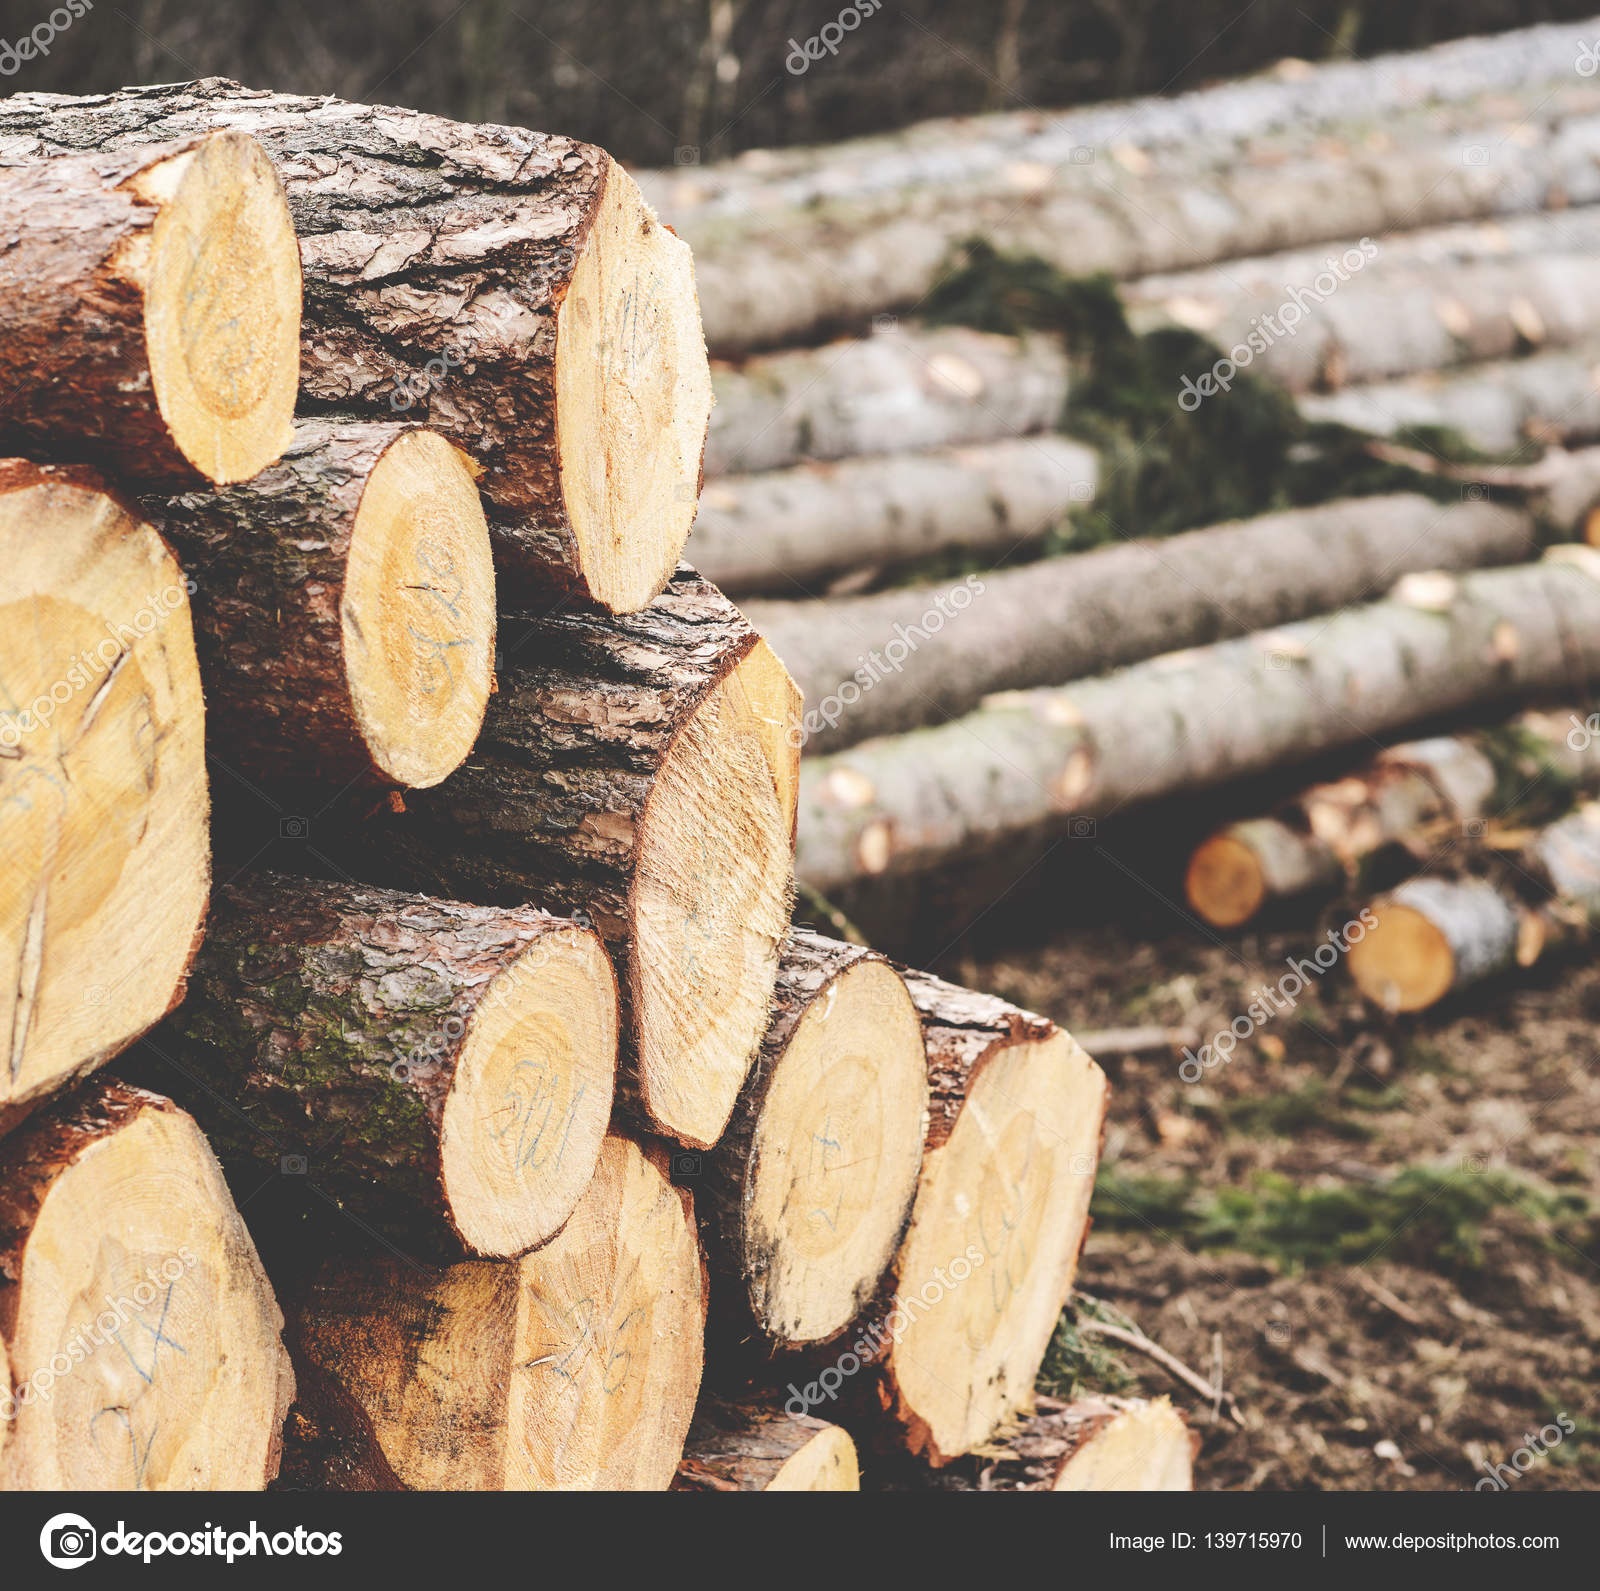 Pile of wood logs ready for winter — Stock Photo © Alexis84 #139715970